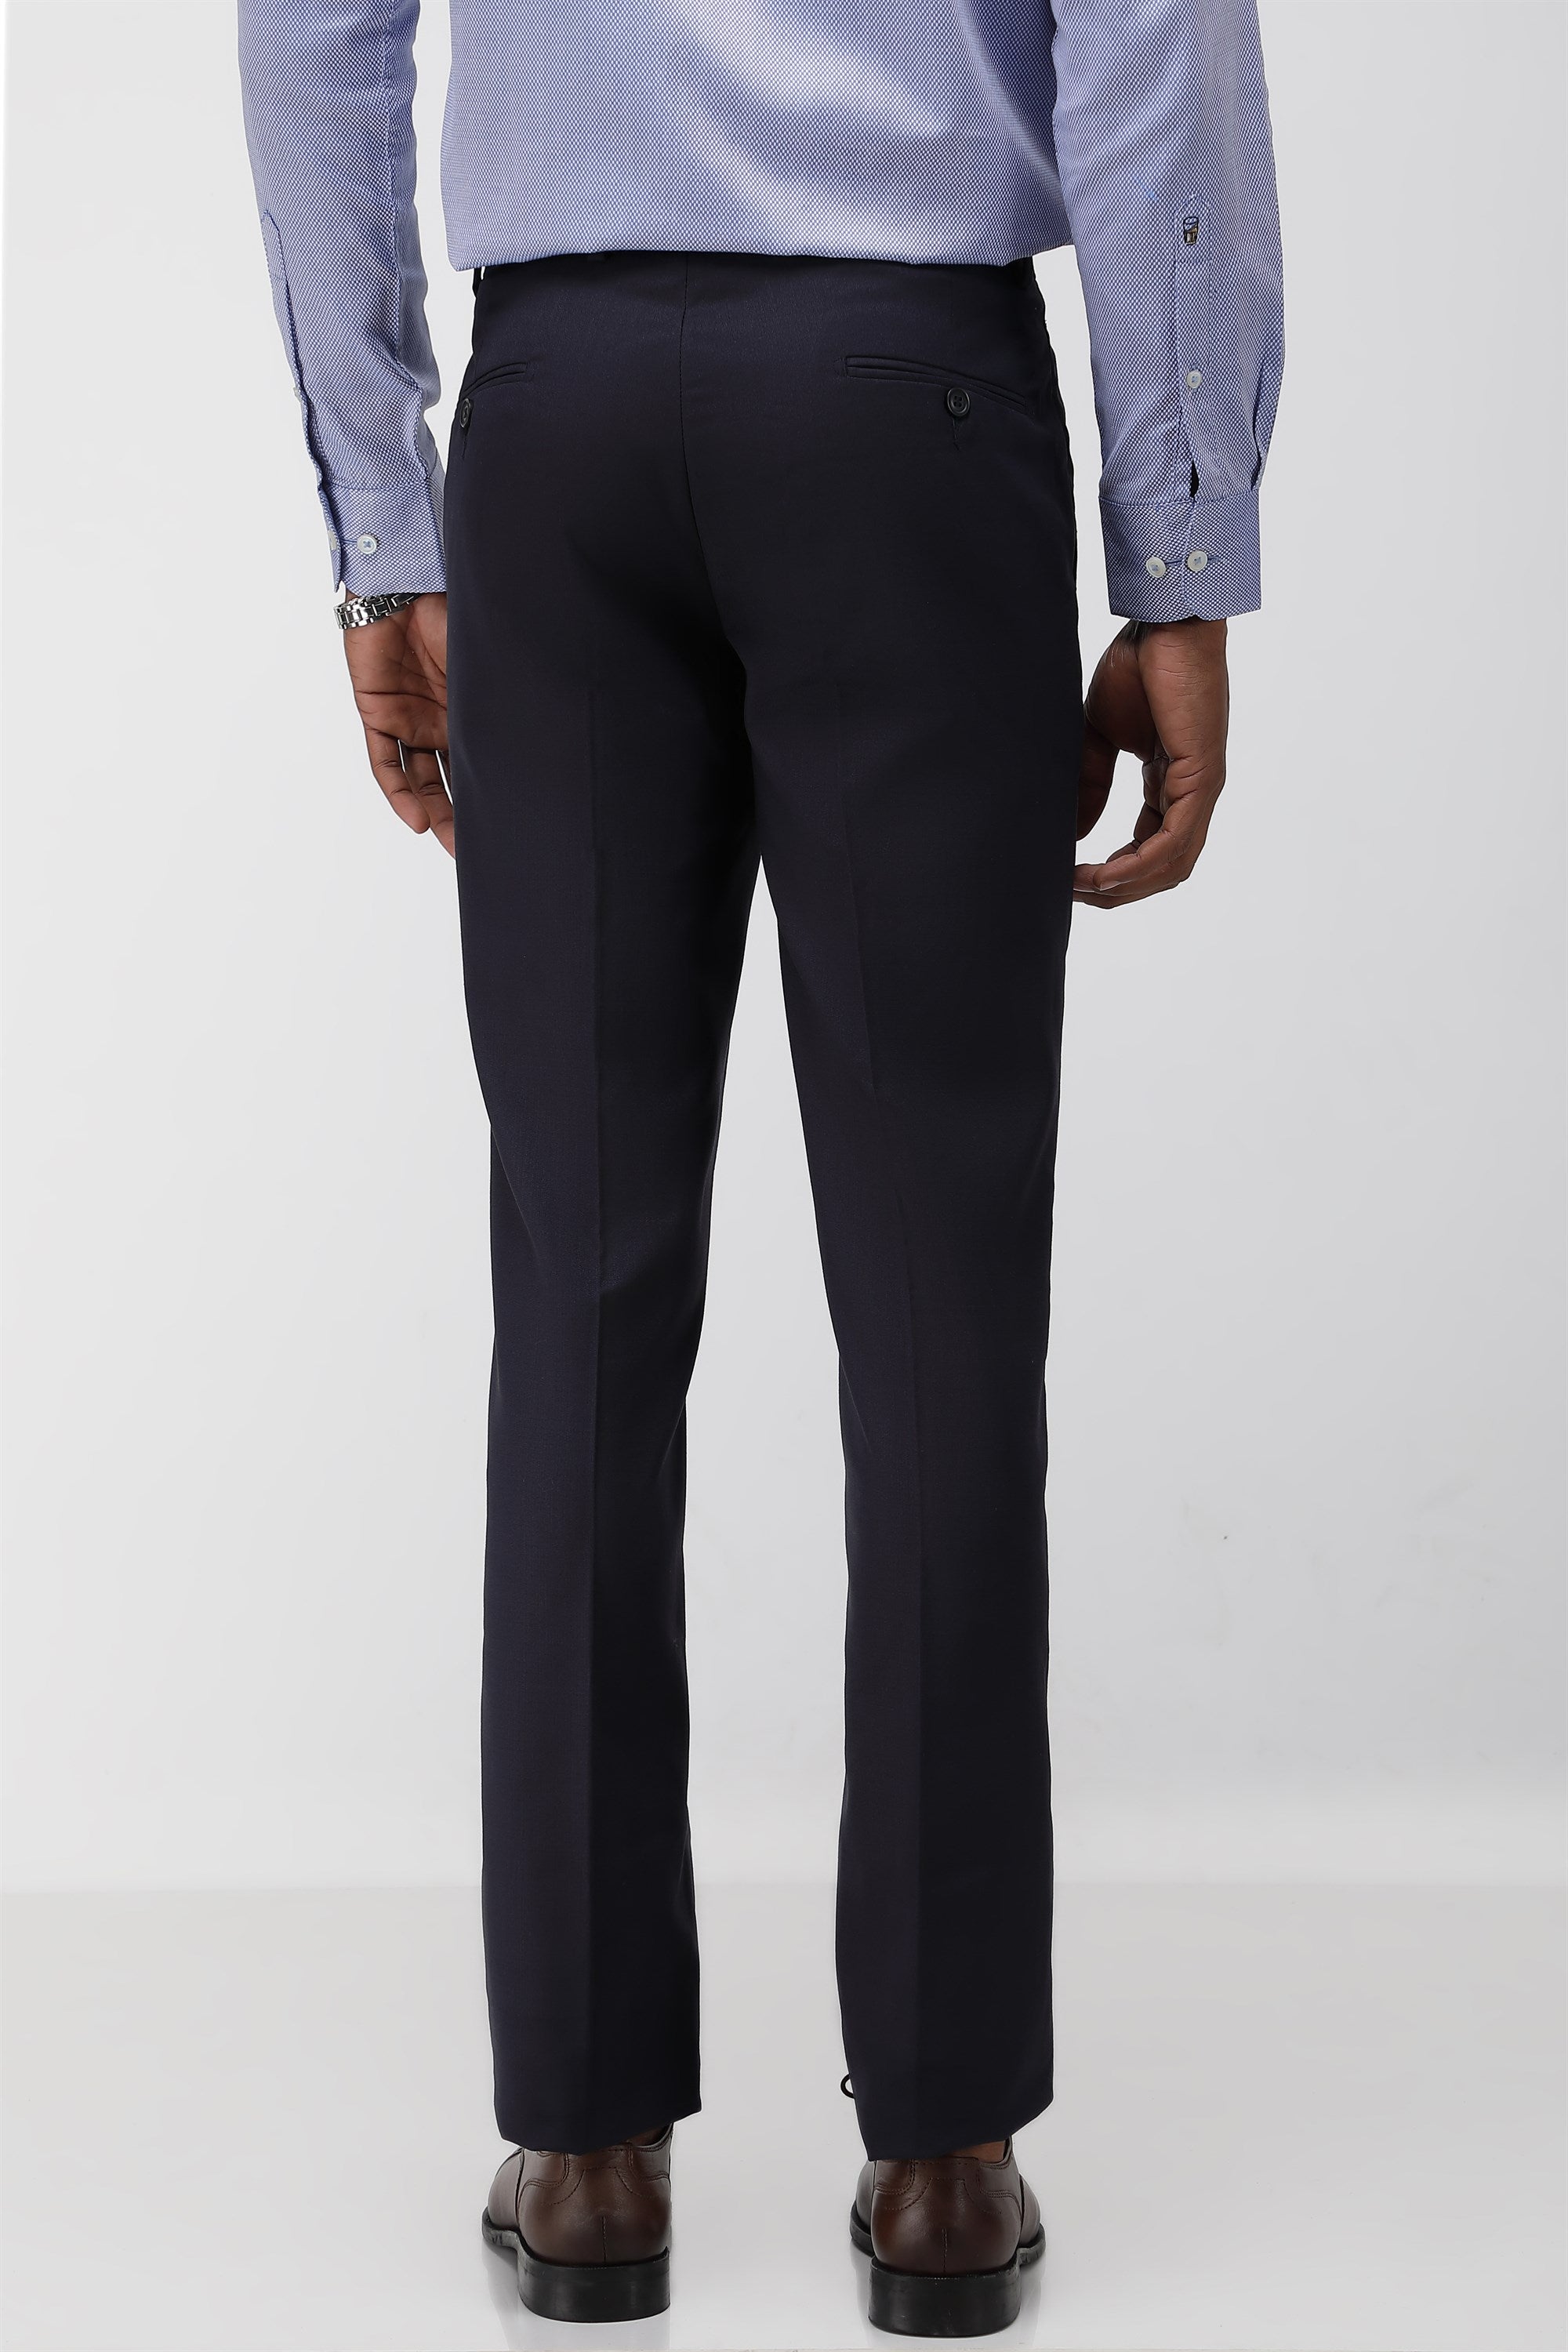 T the brand Stretch Formal Flat Front Trouser - Navy Blue